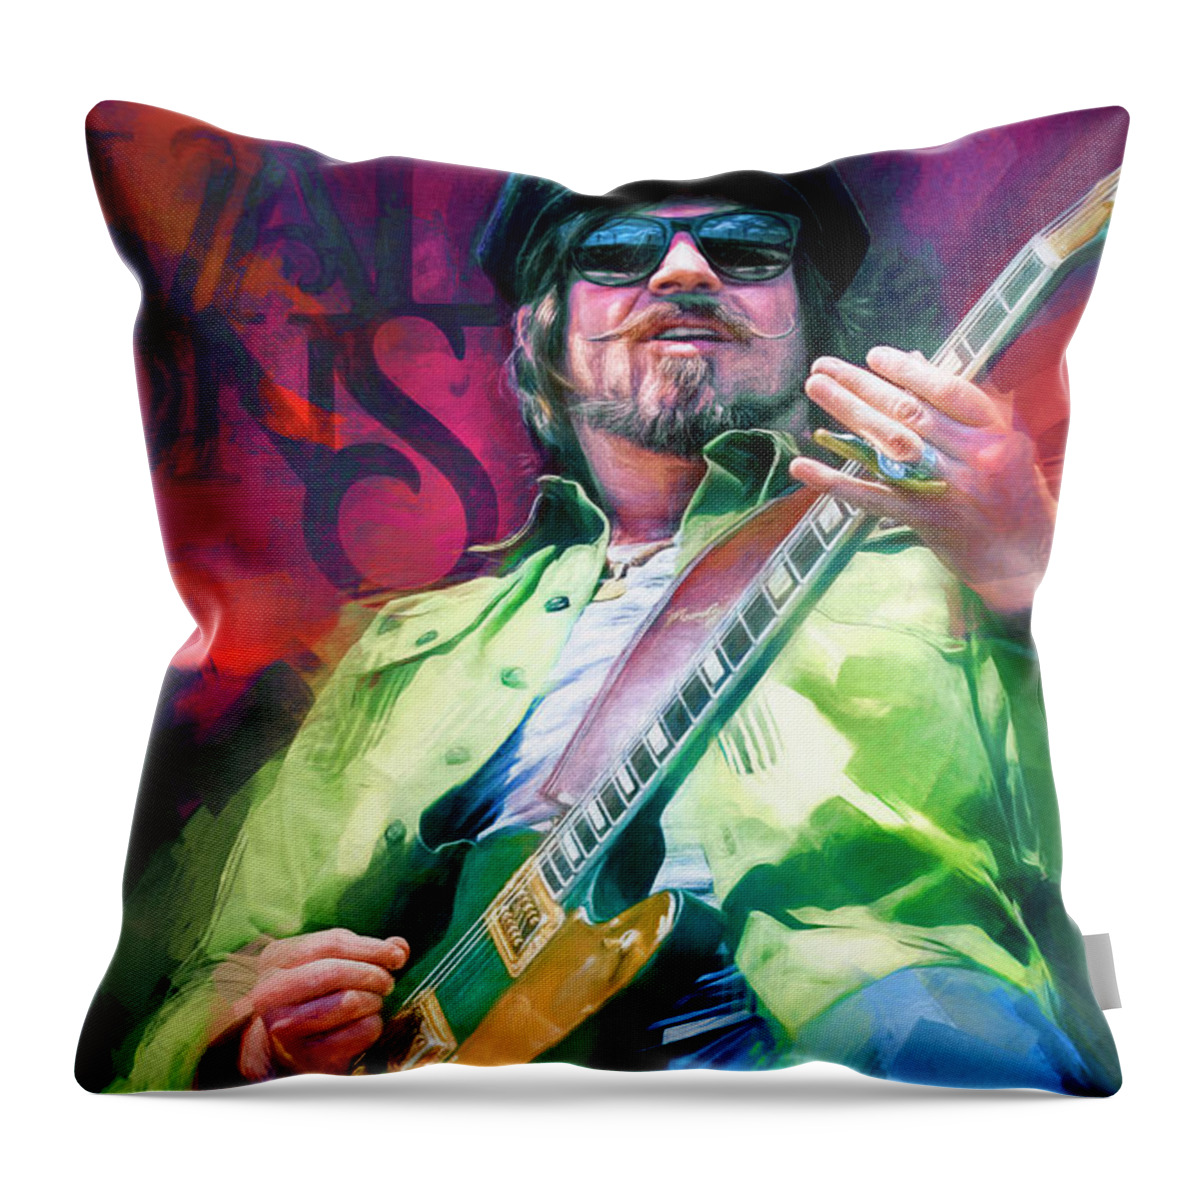 Rival Sons Throw Pillow featuring the mixed media Scott Holiday Rival Sons by Mal Bray